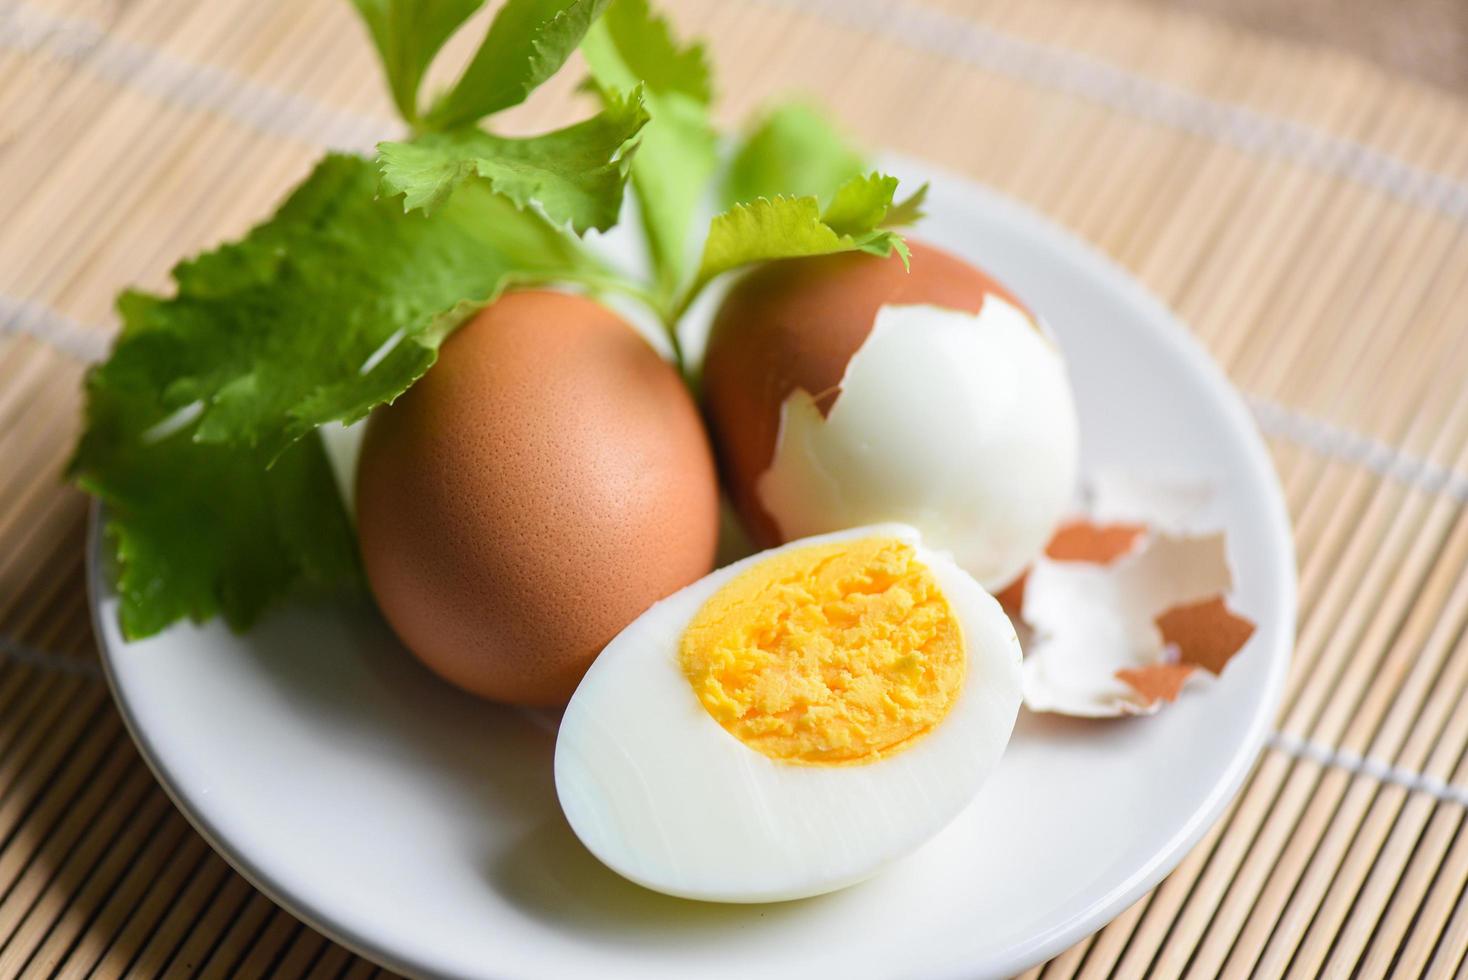 Eggs breakfast, fresh peeled eggs menu food boiled eggs and eggshell on white plate decorated with leaves green celery on wooden background, egg cooking healthy eating concept photo